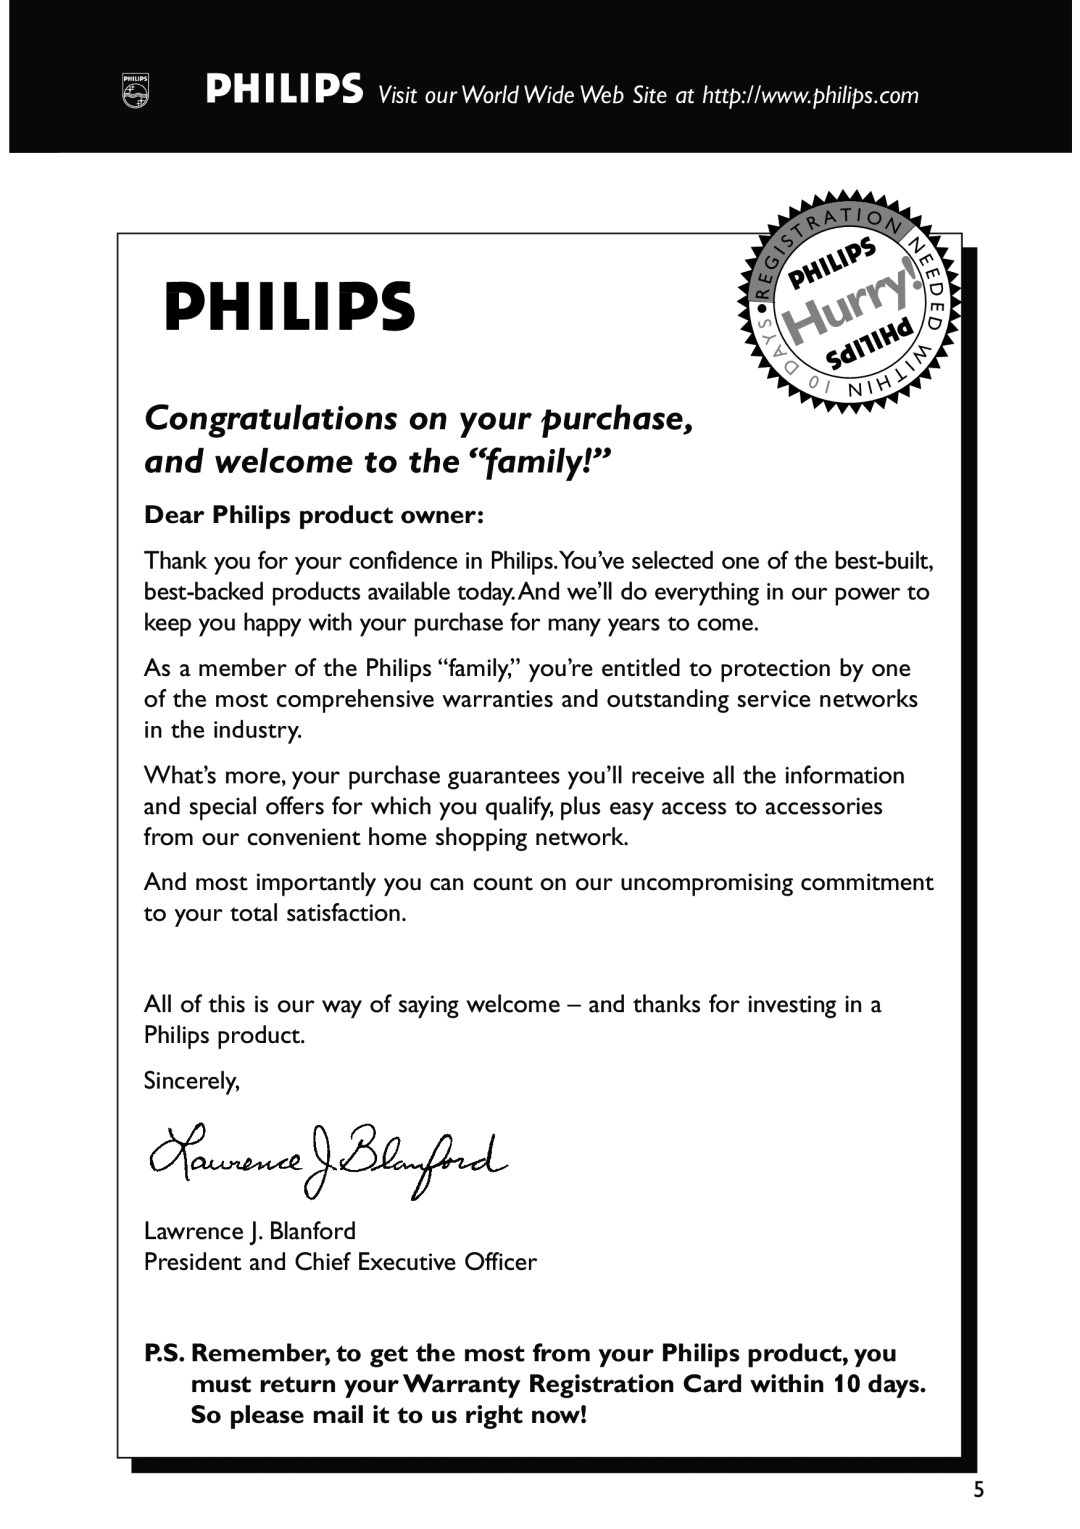 Philips FW-C557/37 warranty Dear Philips product owner, Hurry 